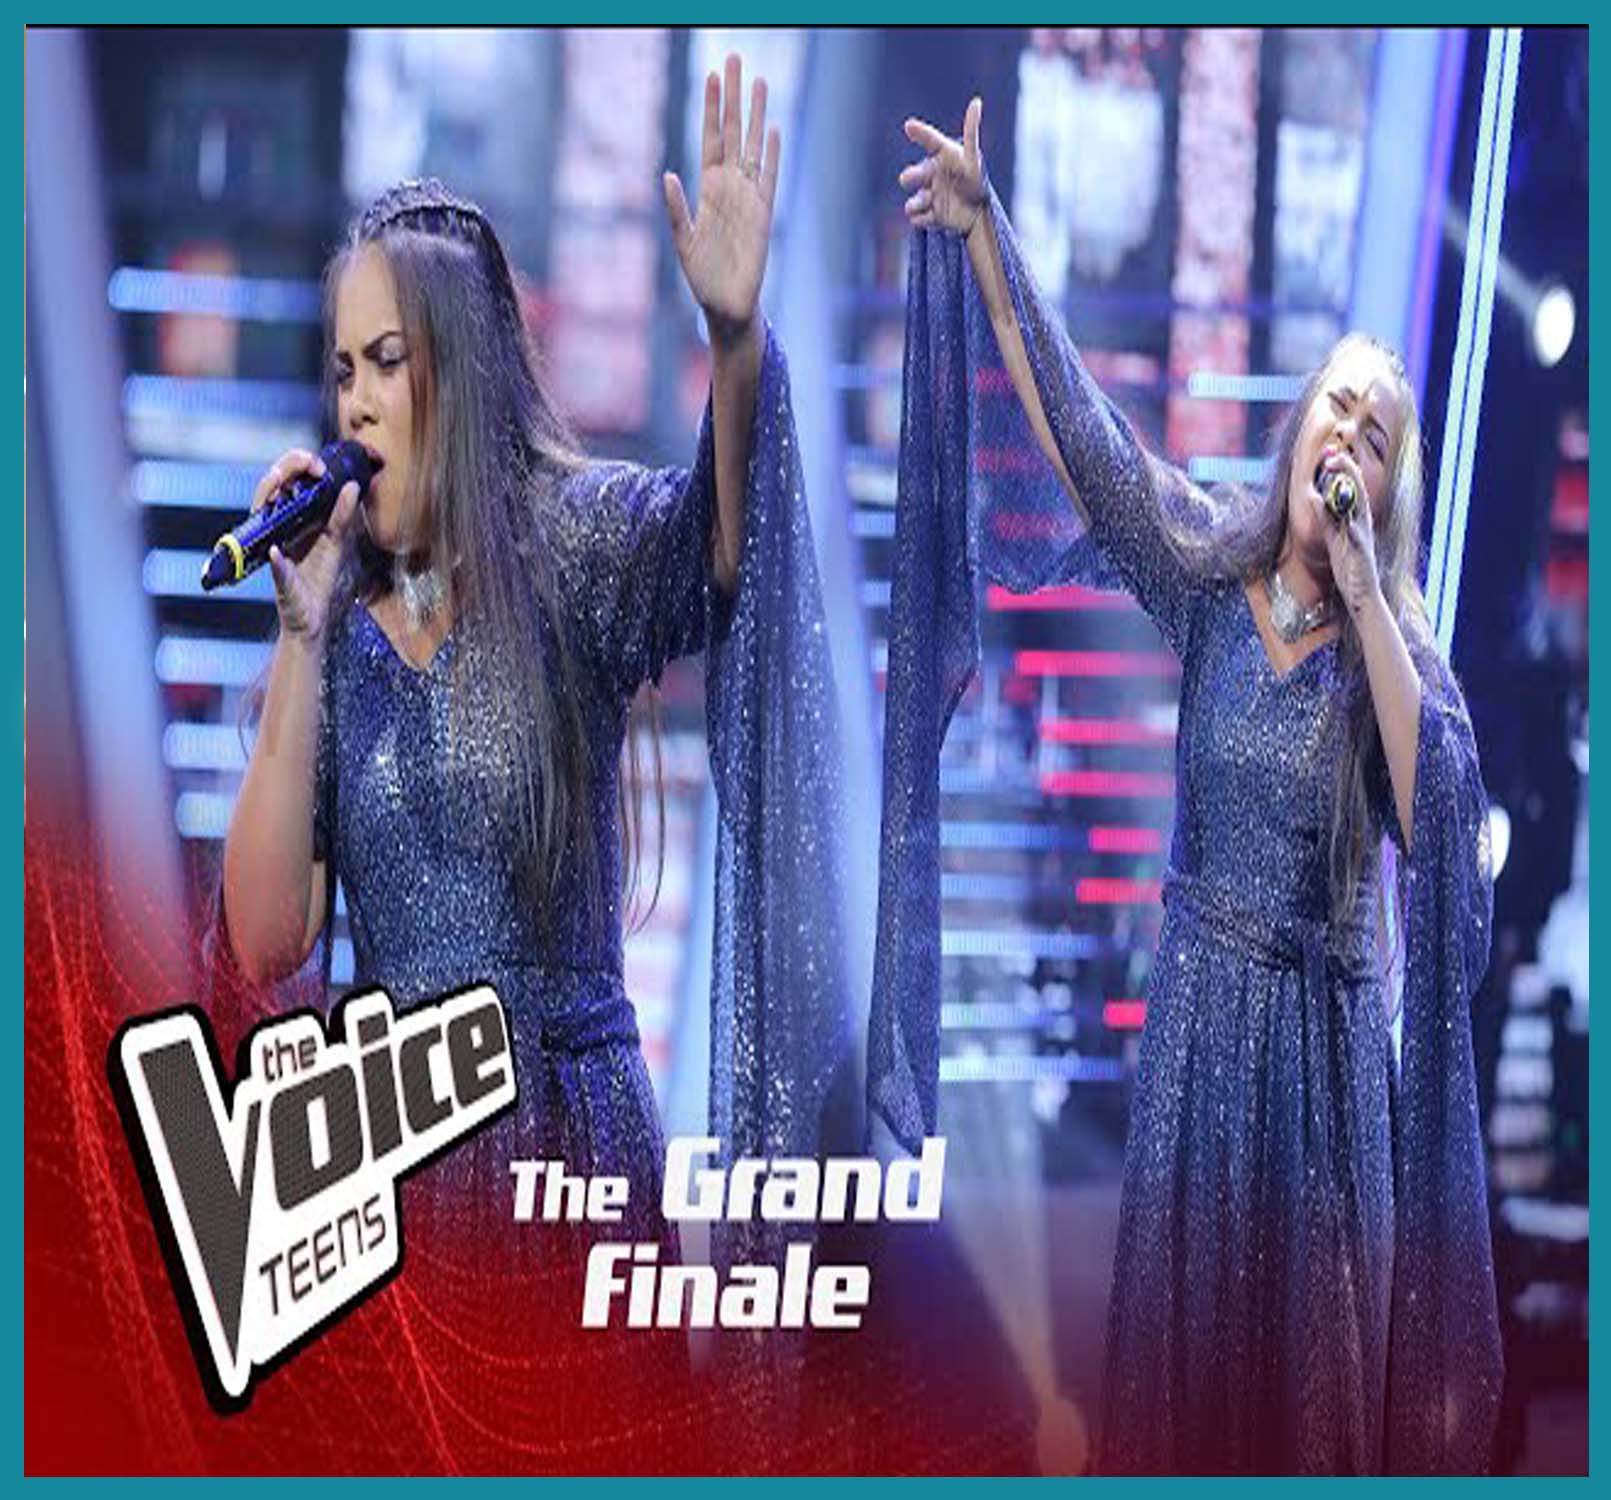 Hello (The Voice Teens Grand Finale)